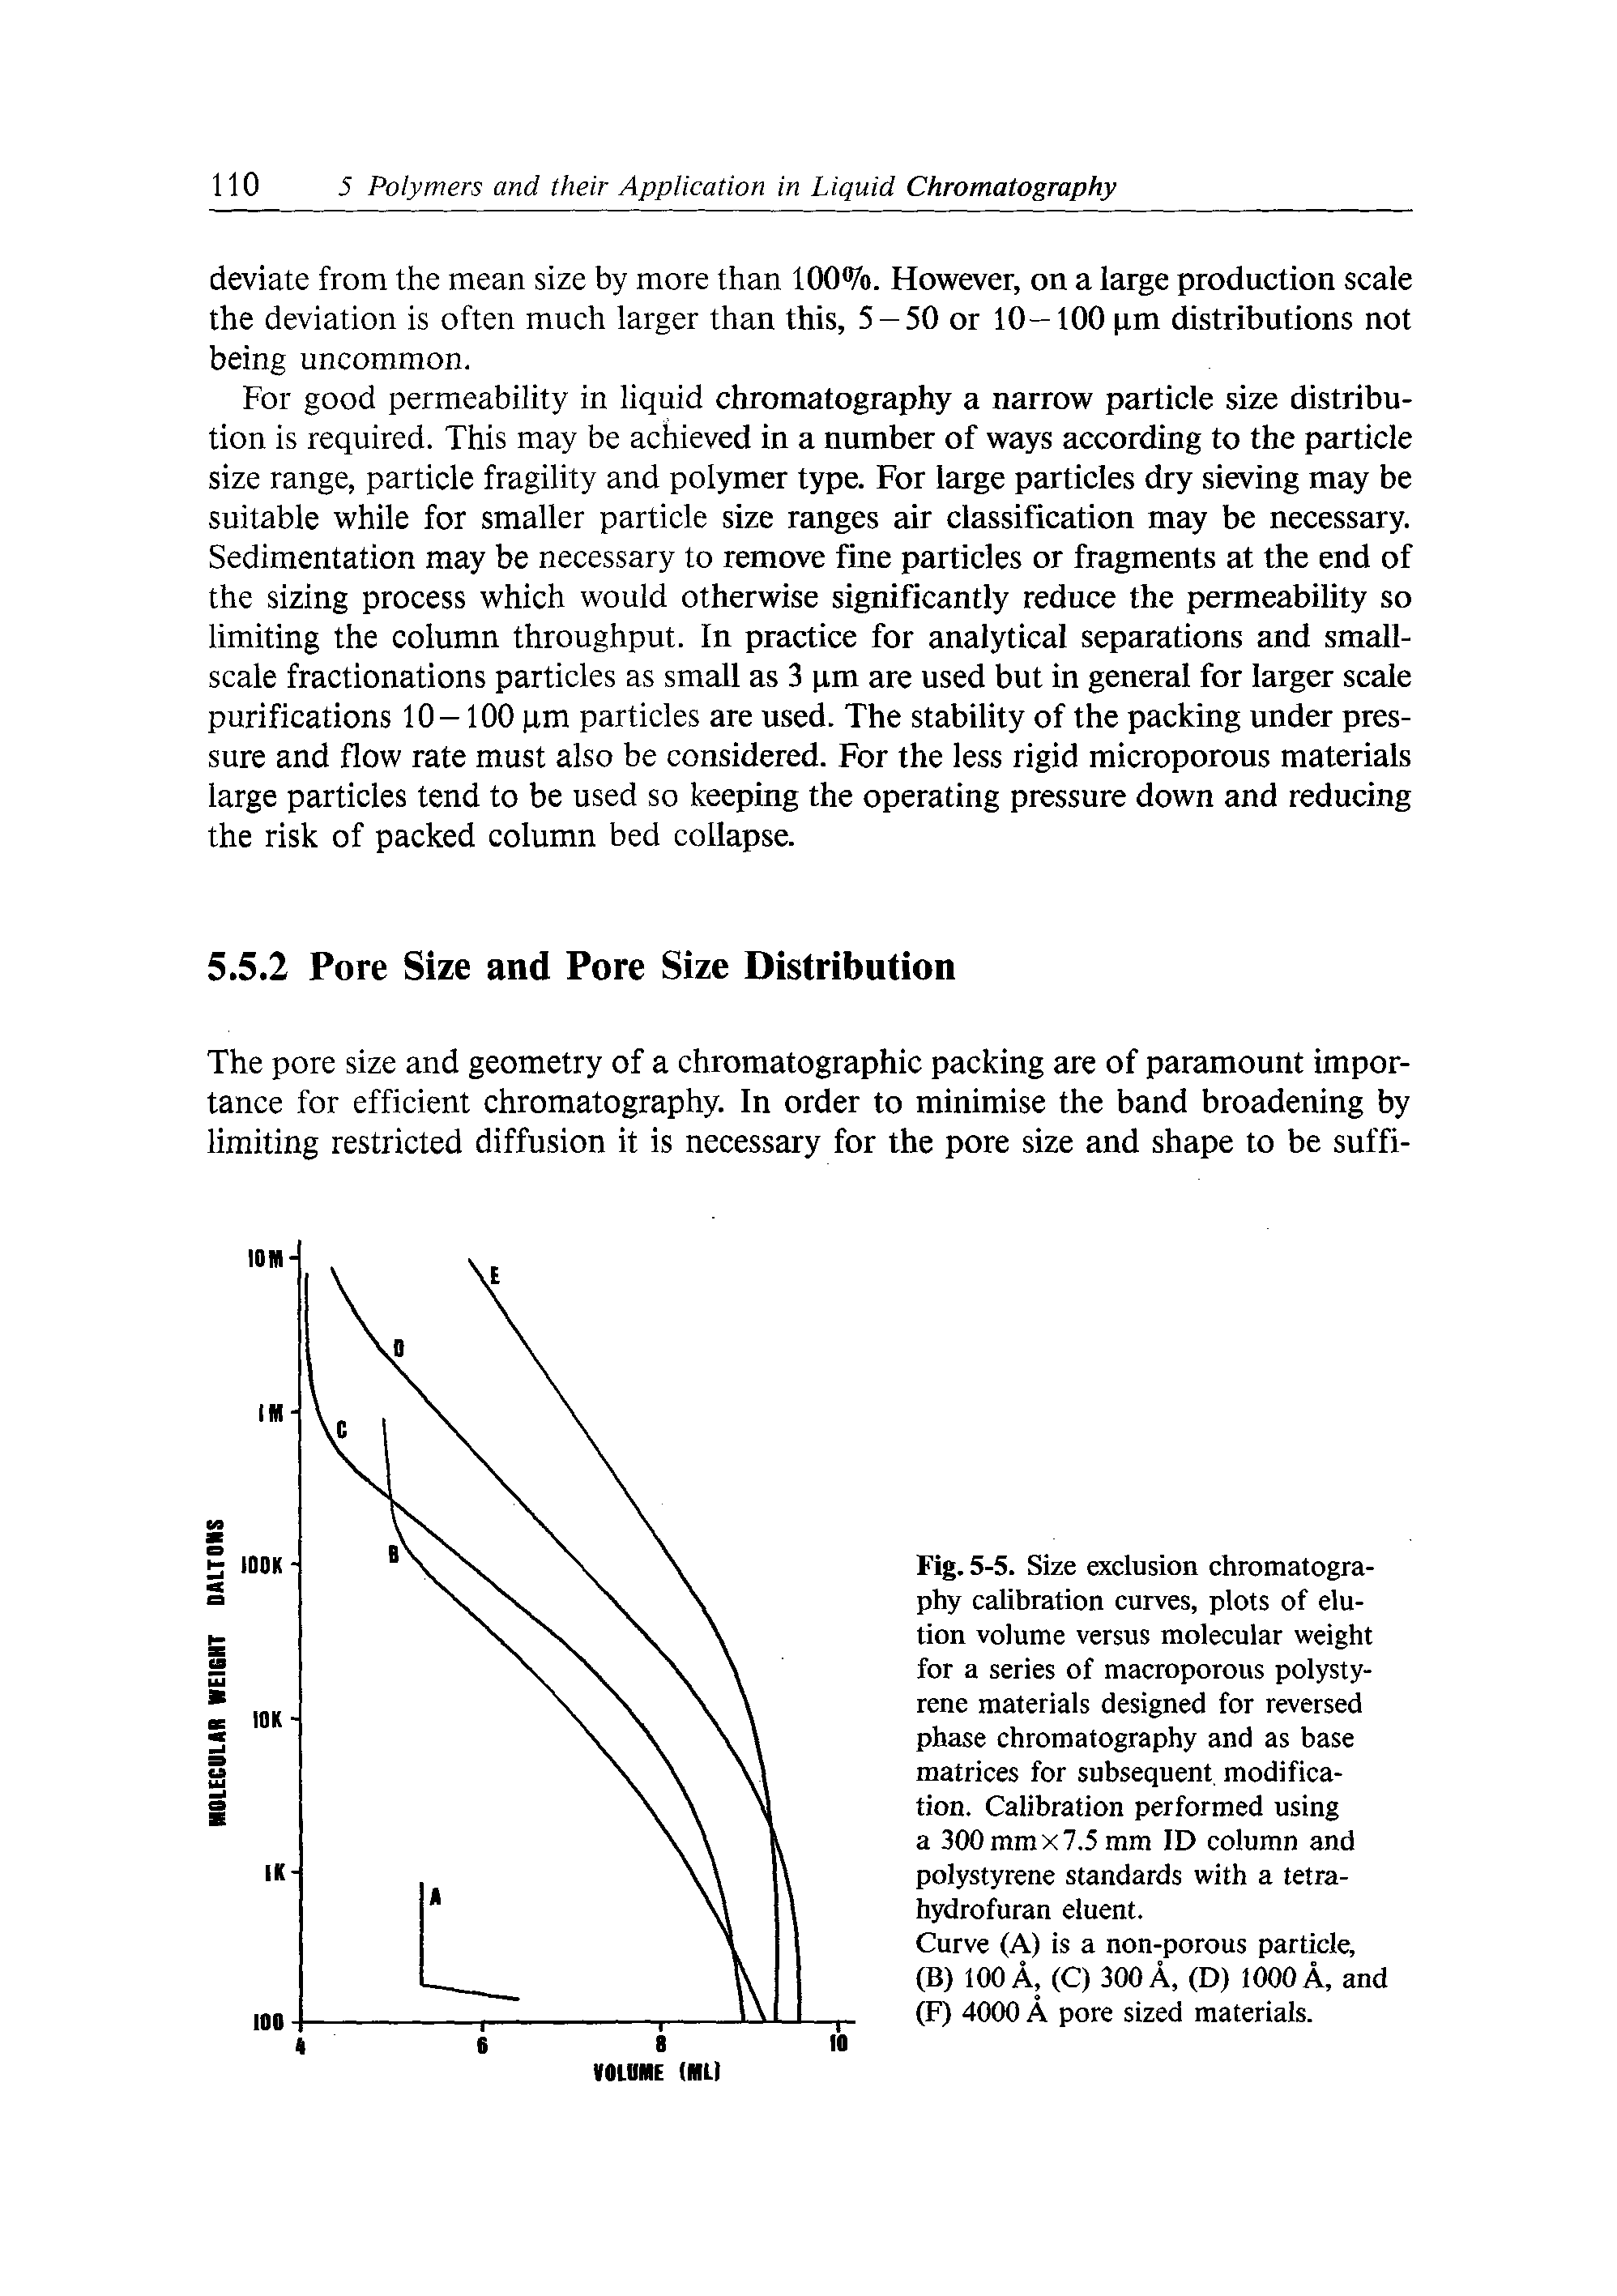 Fig. 5-5. Size exclusion chromatography calibration curves, plots of elution volume versus molecular weight for a series of macroporous polystyrene materials designed for reversed phase chromatography and as base matrices for subsequent modification. Calibration performed using a 300 mm x 7.5 mm ID column and polystyrene standards with a tetra-hydrofuran eluent.